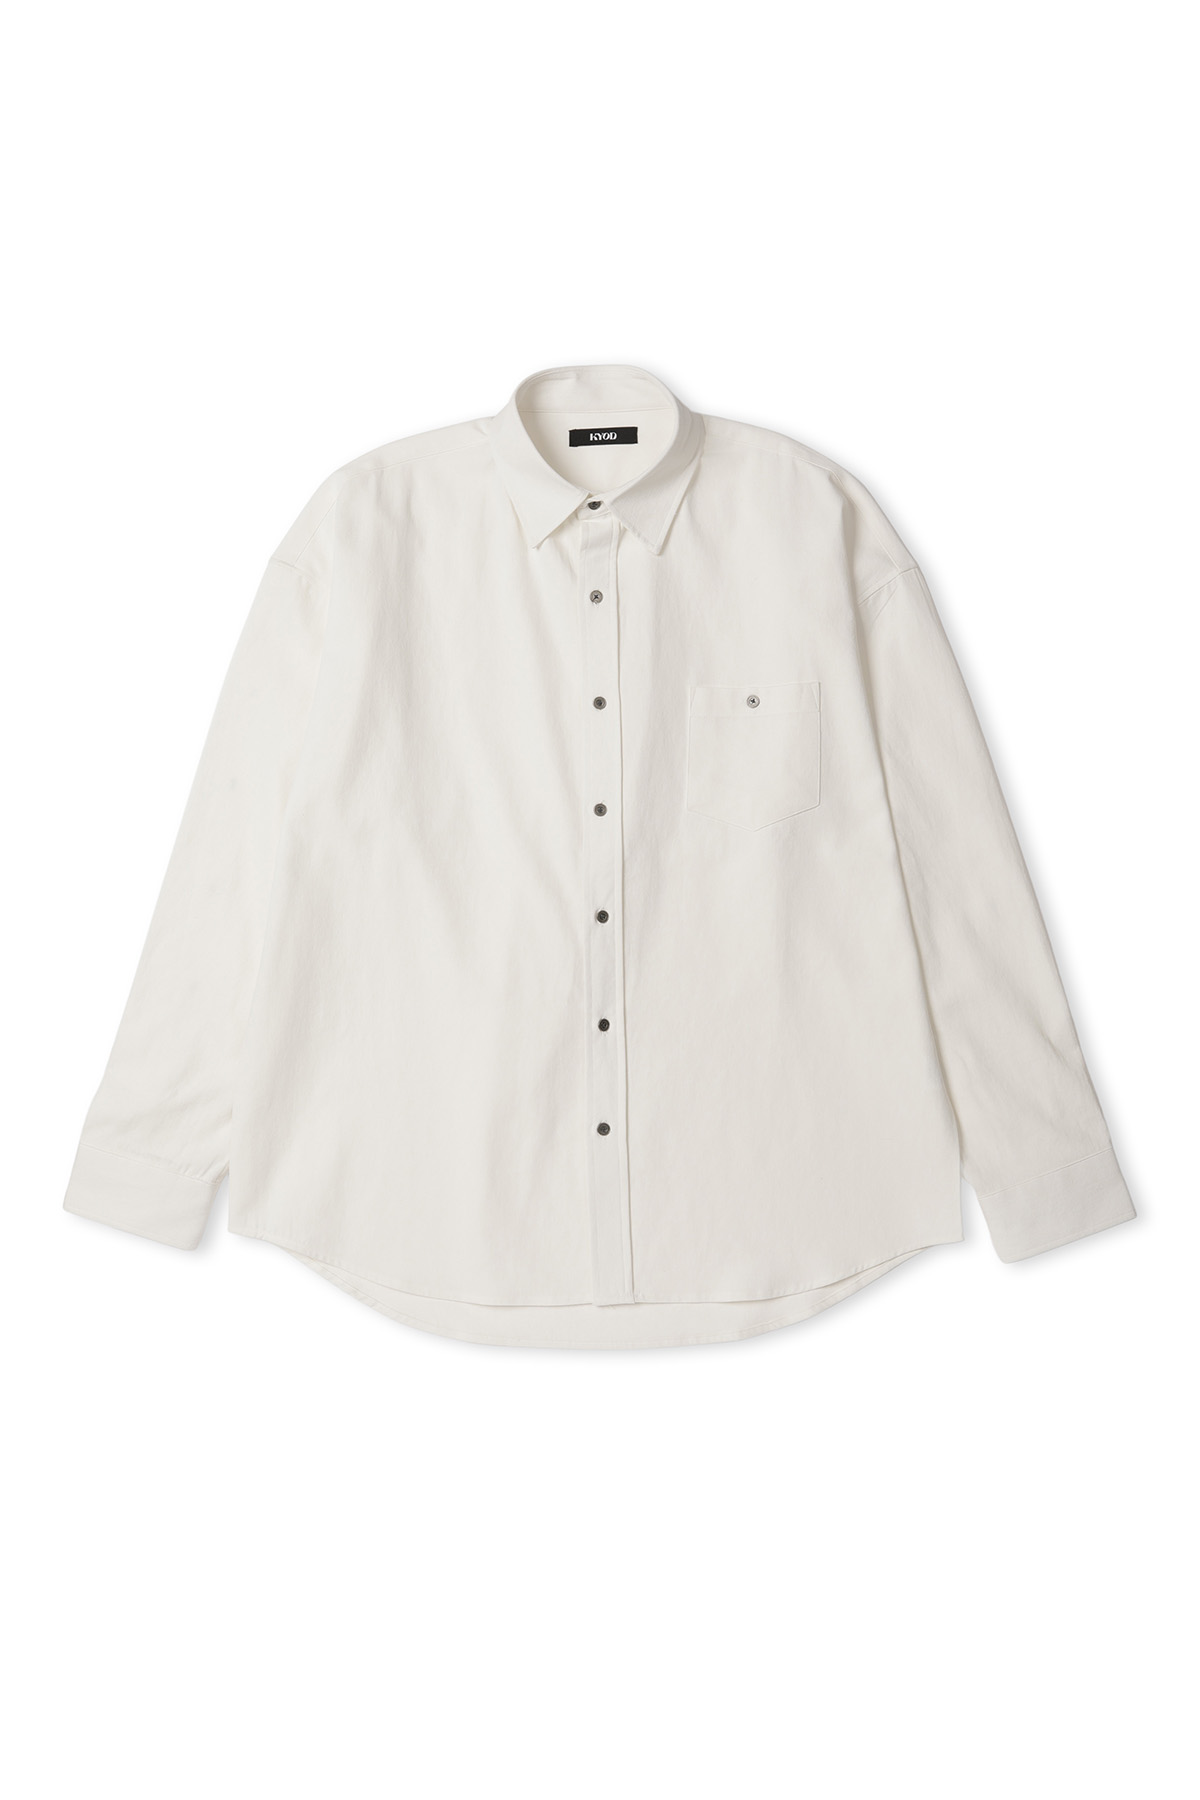 BUTTON SLEEVE SHIRTS ( OFF WHITE )